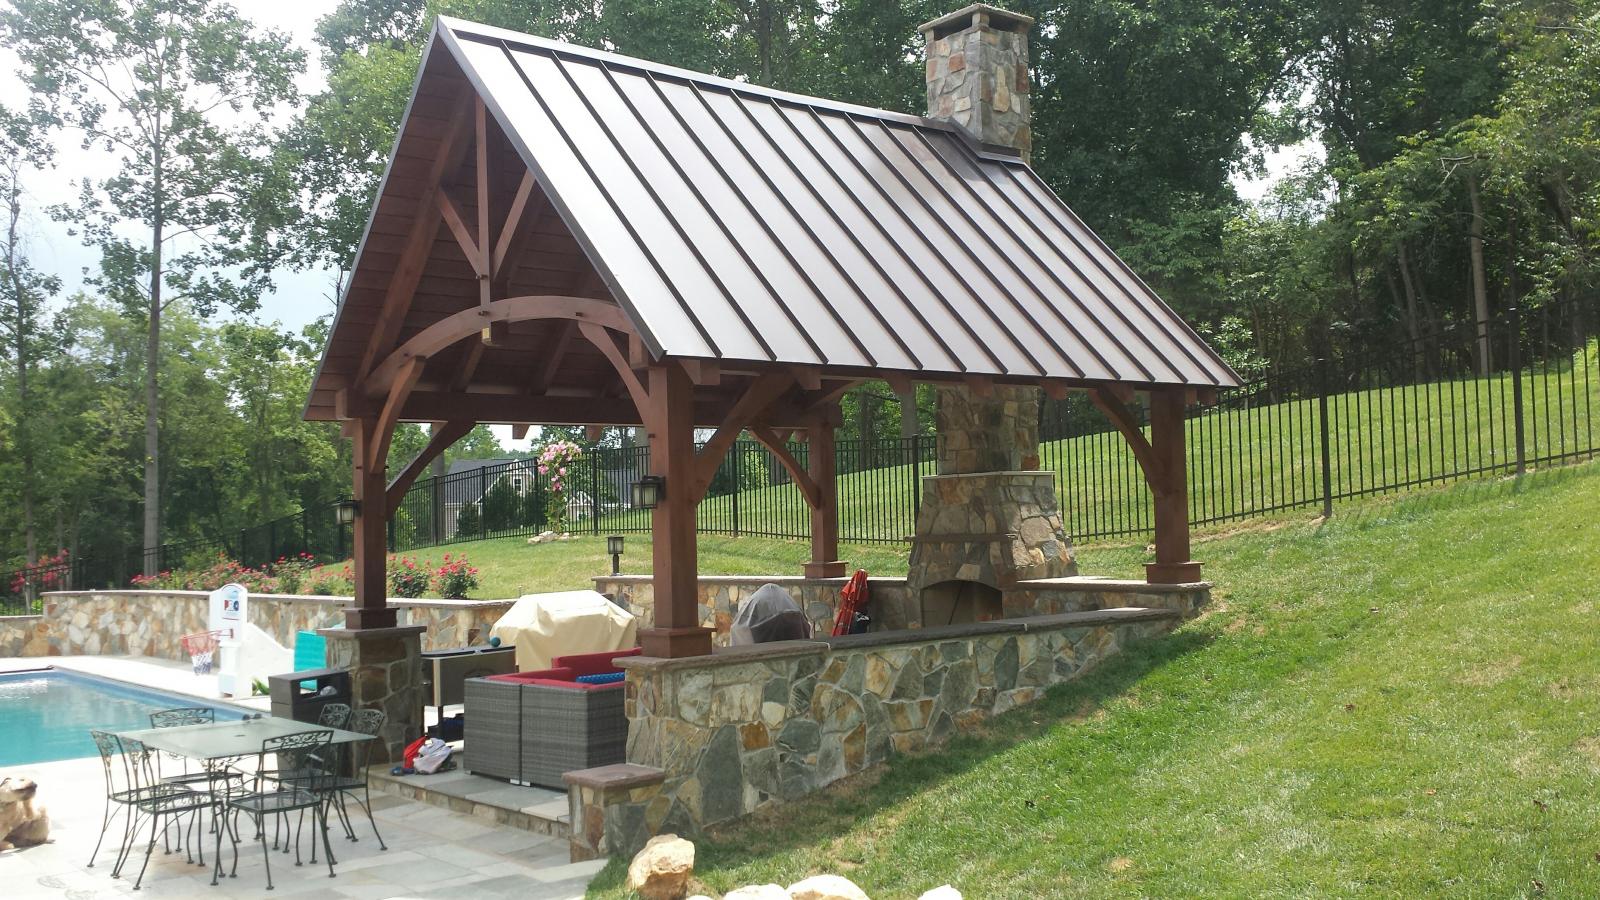 Timber Frame Pavilions | Photos | Homestead Structures